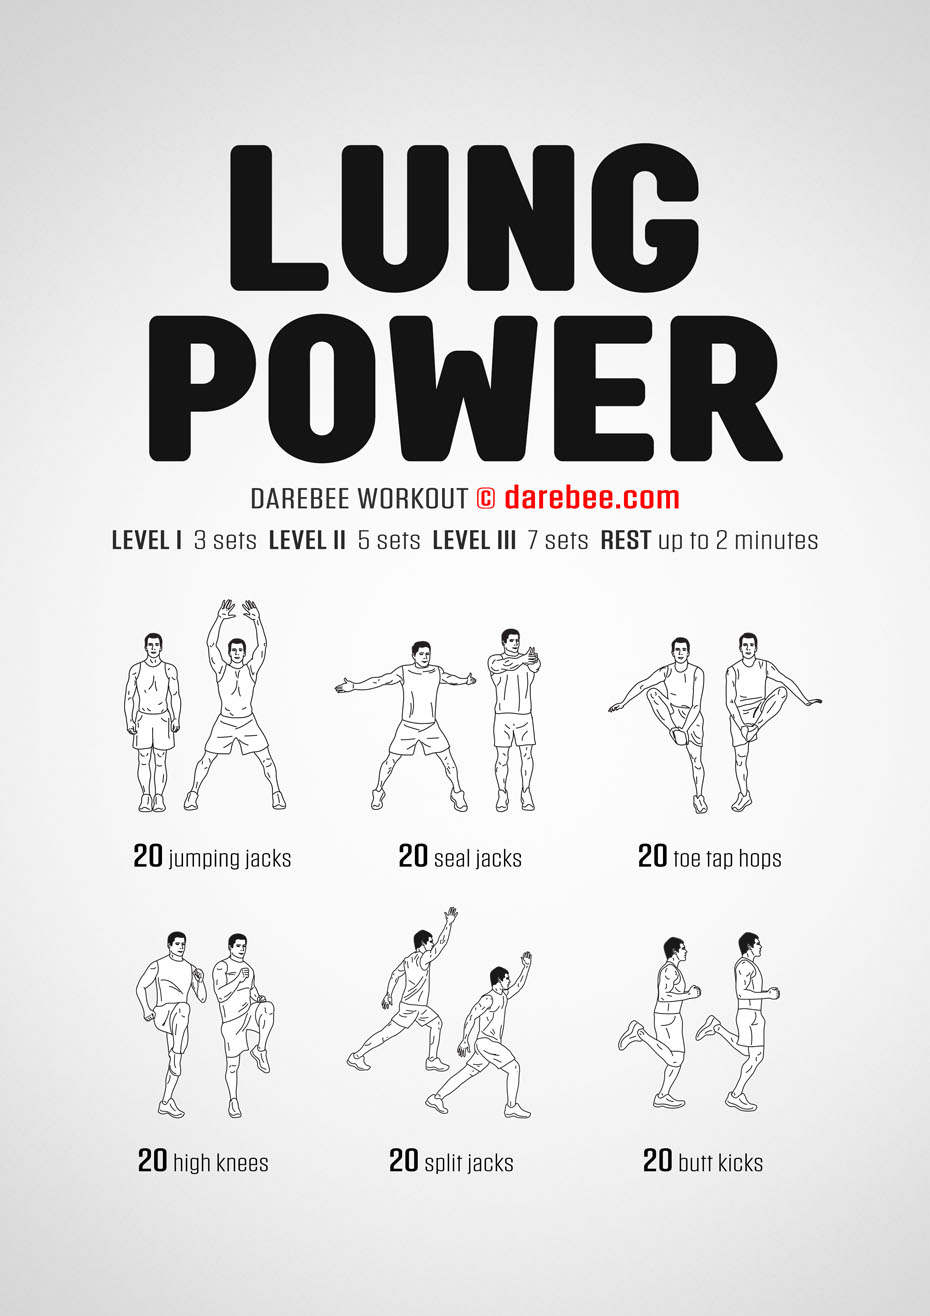 Lung Power is a Darebee home fitness workout that helps you work your diaphragm muscles but also gets your body temperature up and your blood flowing throughout your body.